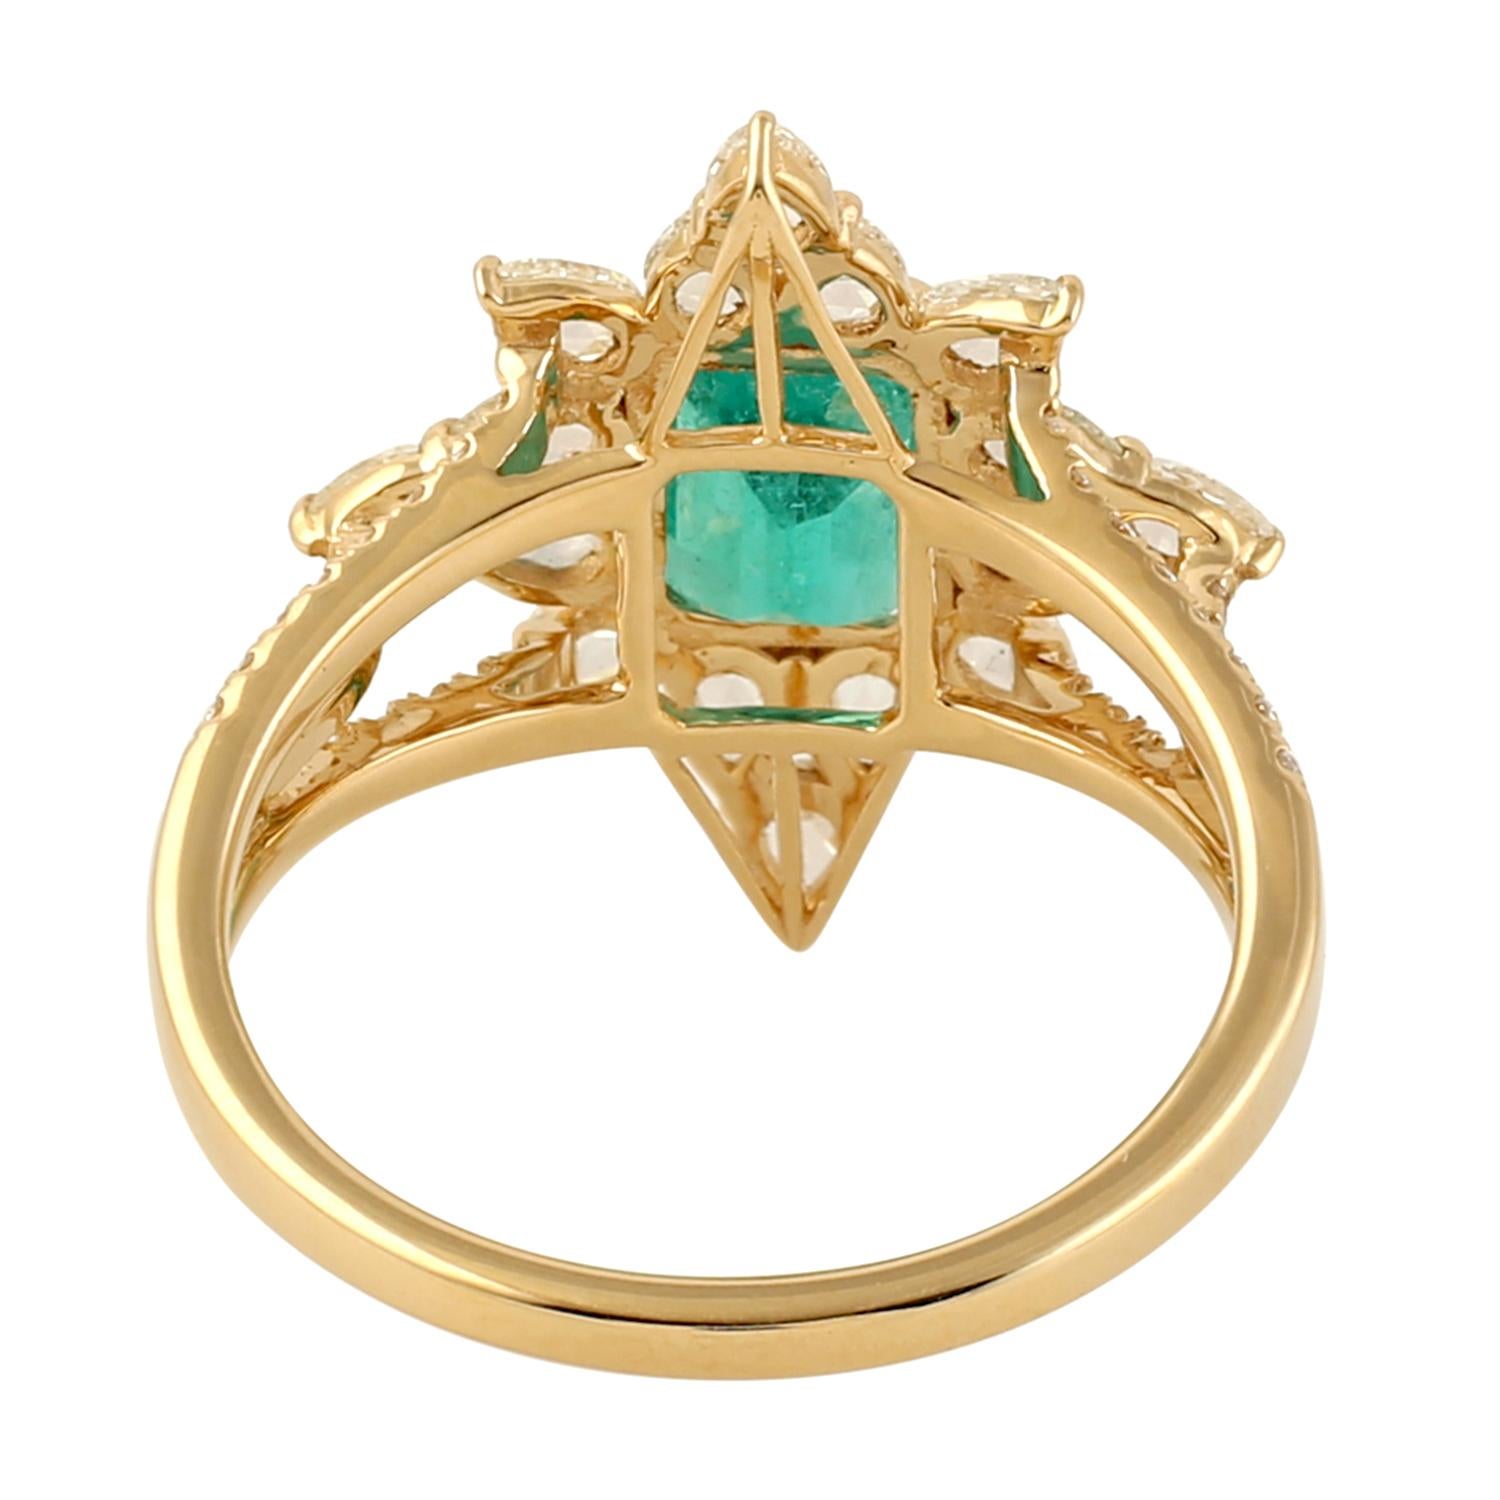 Mixed Cut Octogen Shaped Emerald Starburst Ring With Rose Cut Diamonds In 18k Yellow Gold For Sale